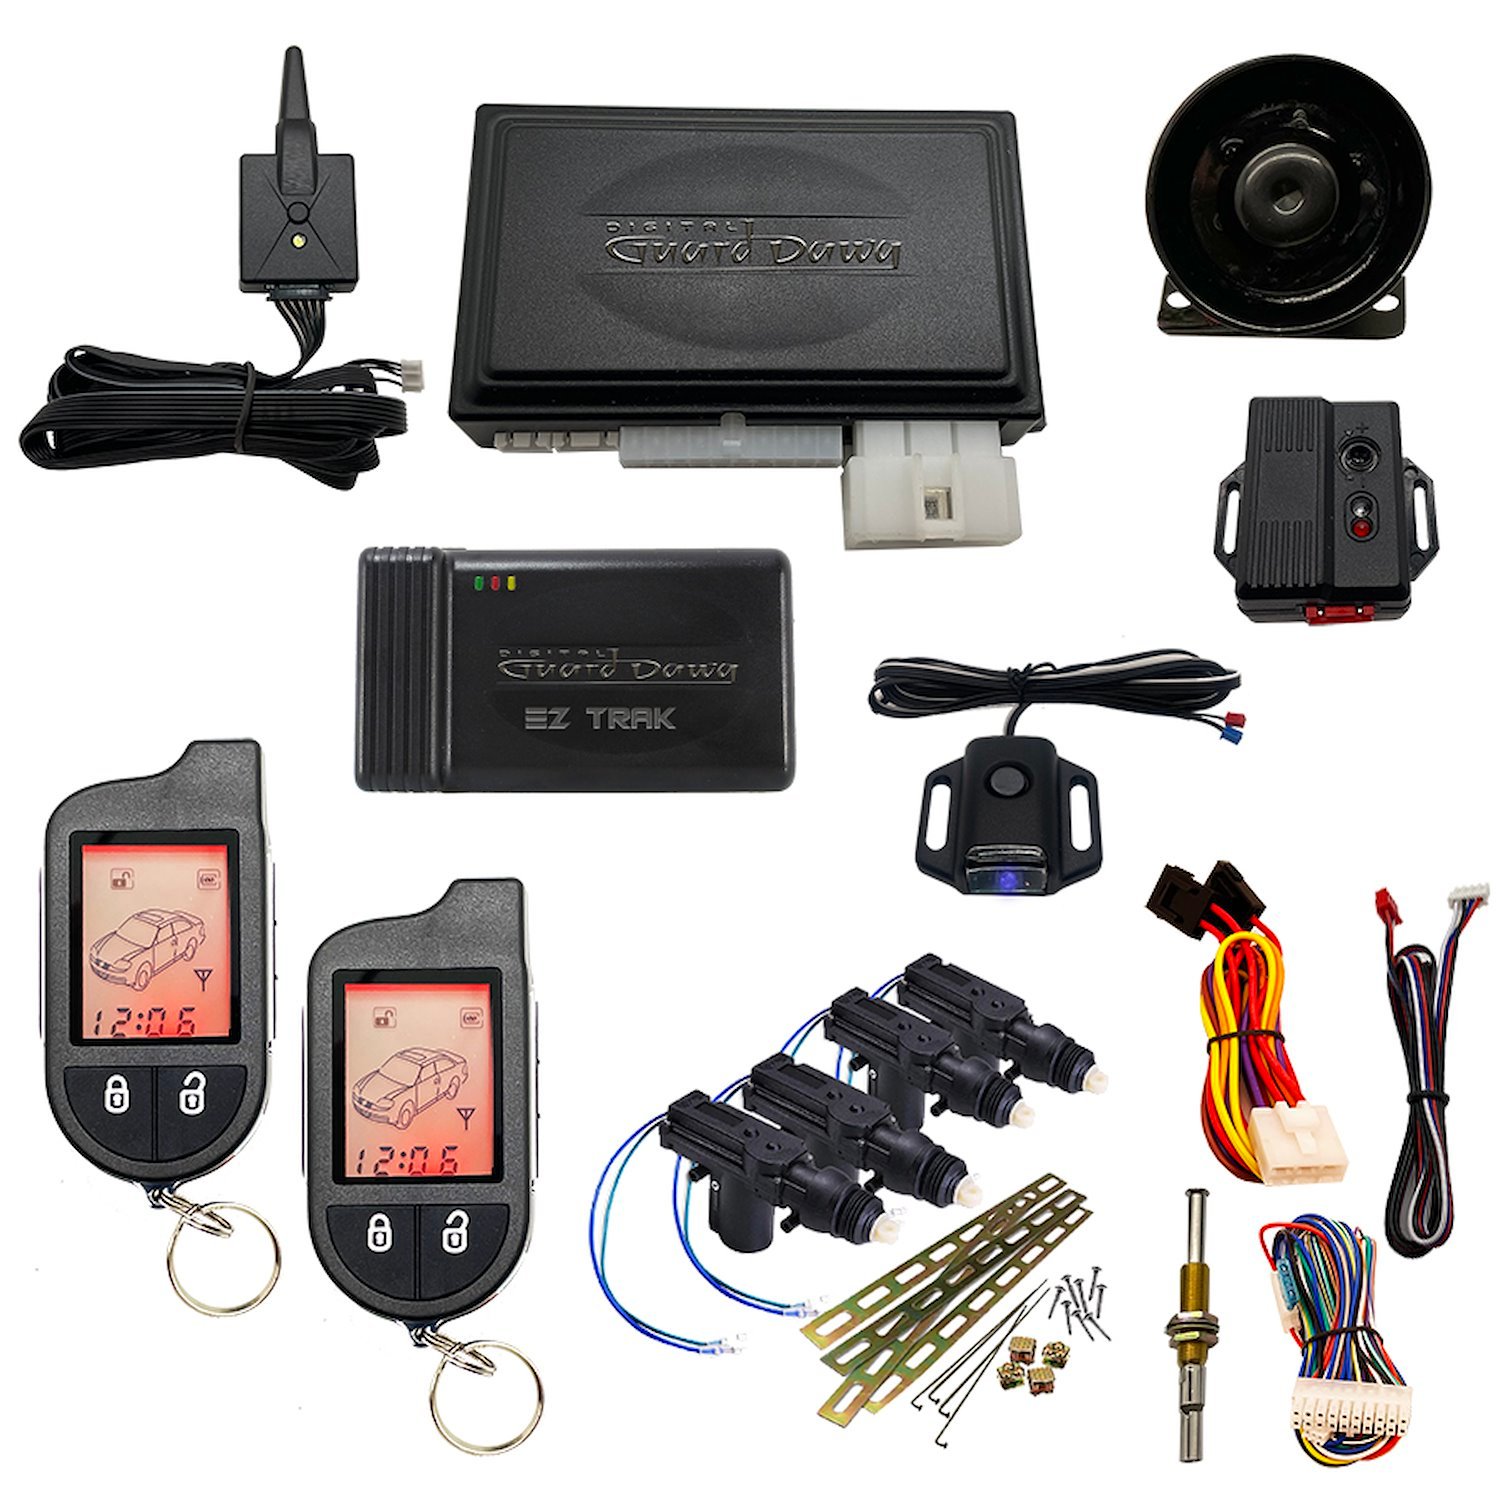 DGD-KY-ALM-RS2-4A-EZ Keyless Entry, Alarm System, and Remote Start, 2-Way, w/4-Door Actuator Kit and Smart Phone EZ-Tracking